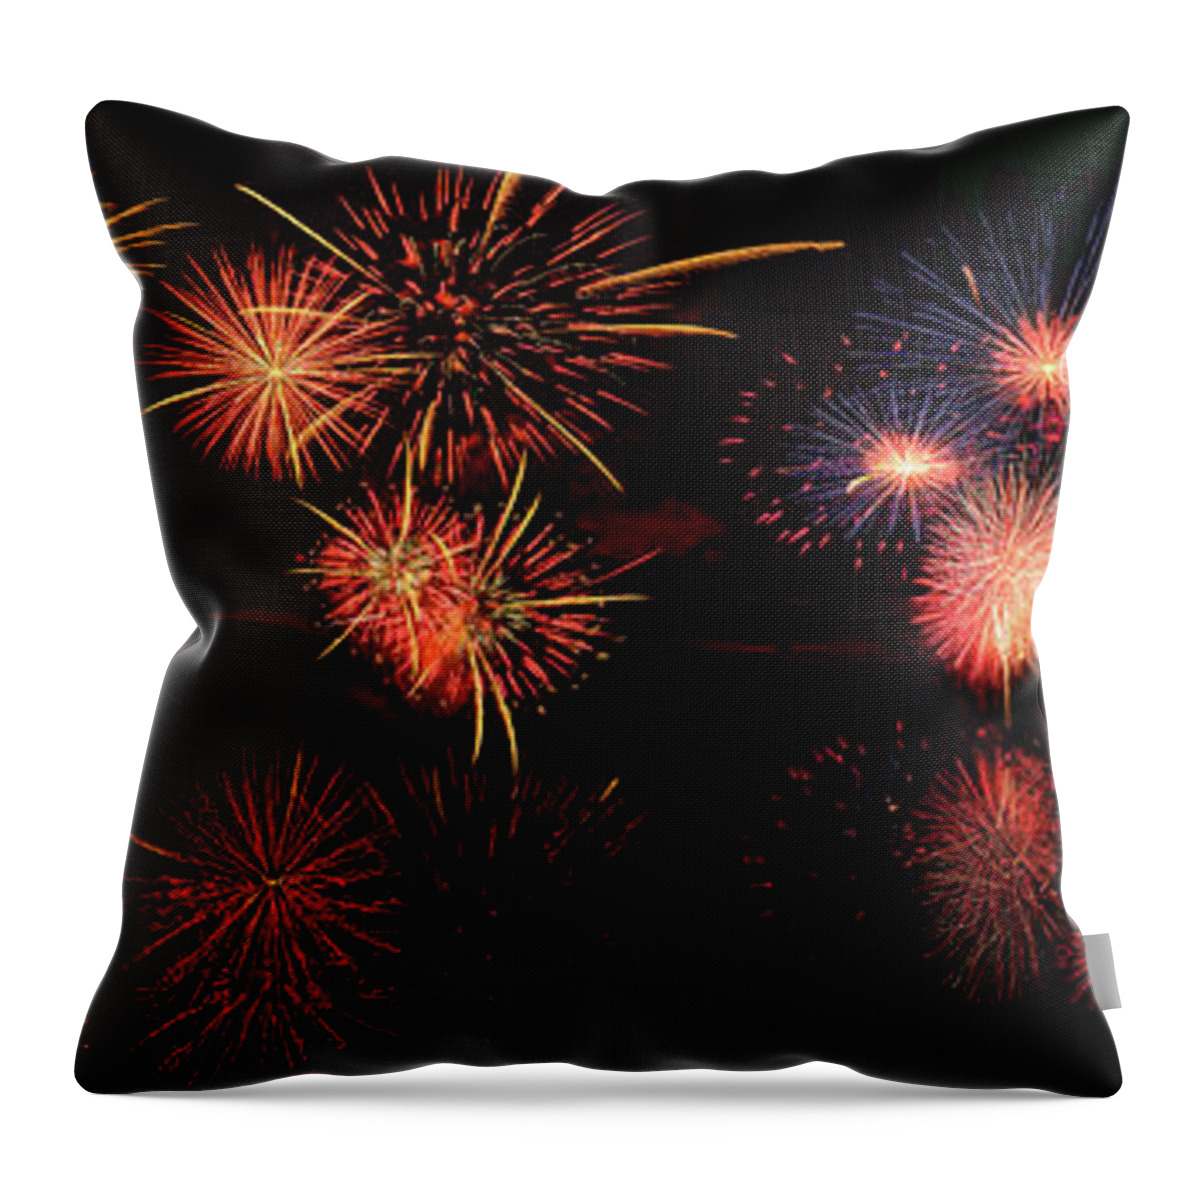 Fireworks Throw Pillow featuring the digital art Fireworks Reflection In Water Panorama by O Lena